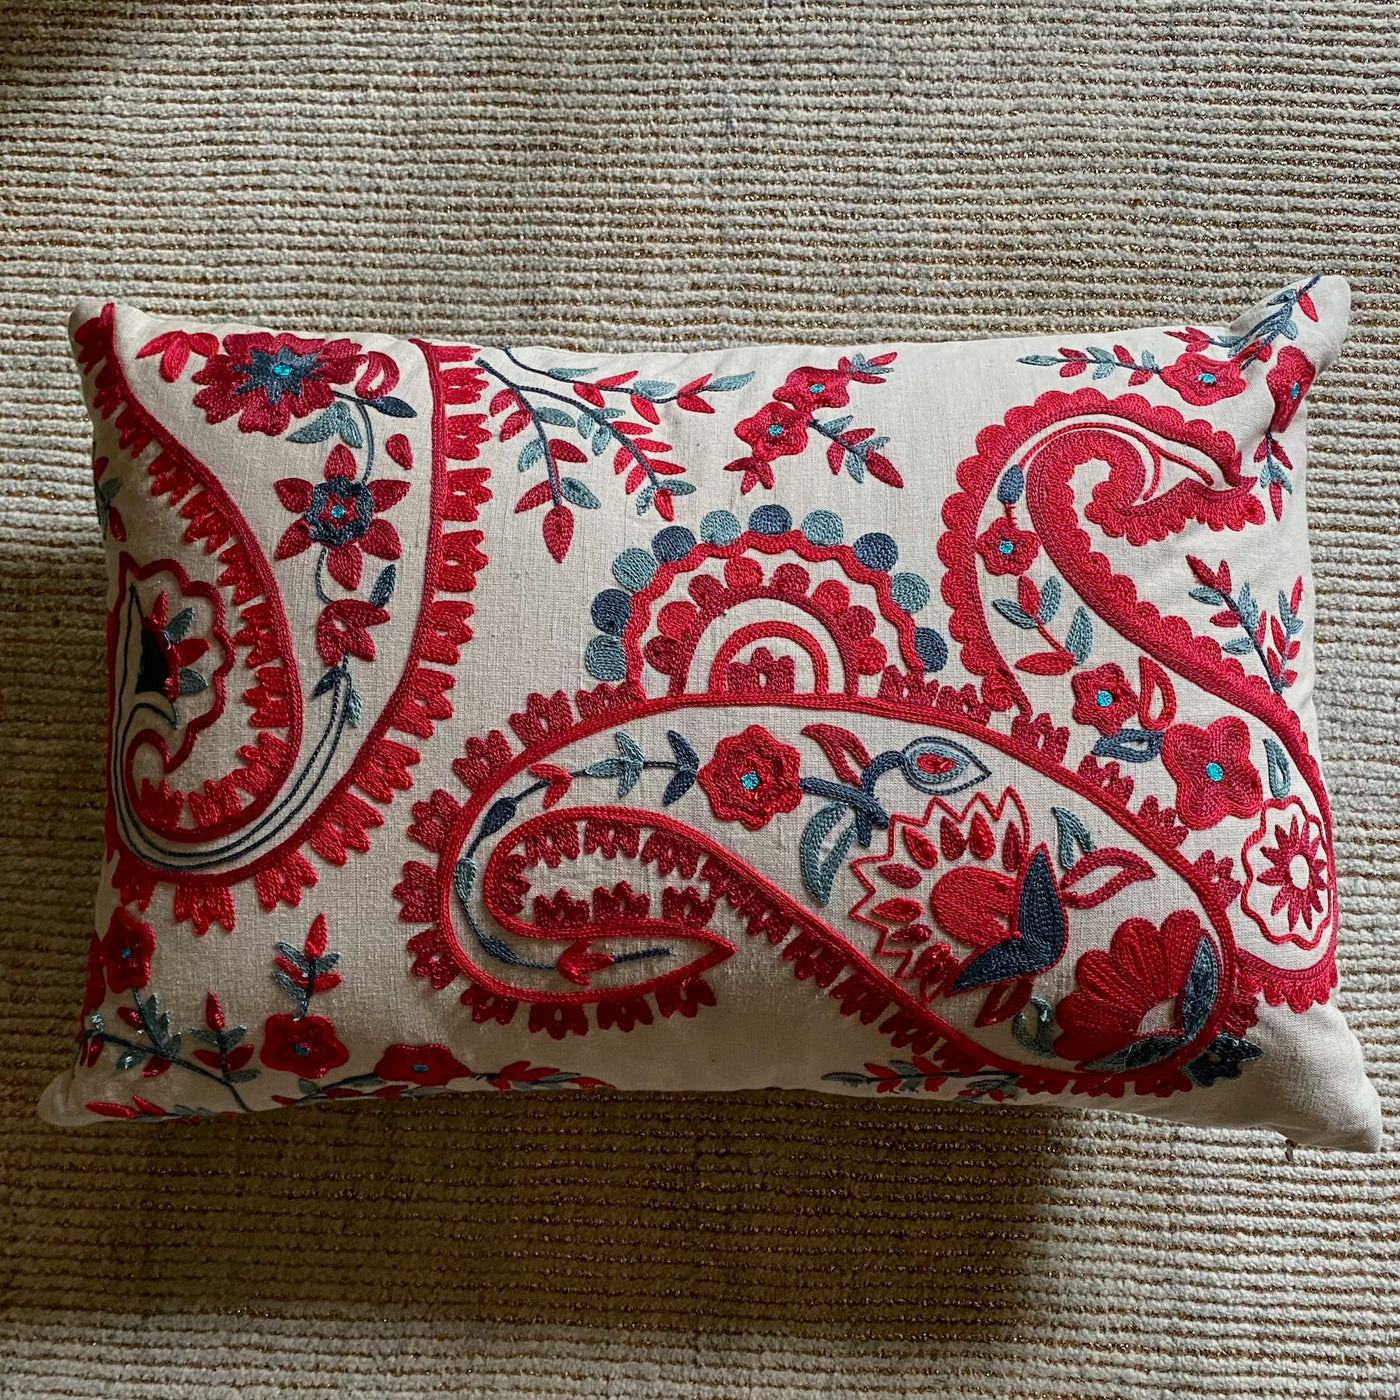 embroidered pink floral cushion cover